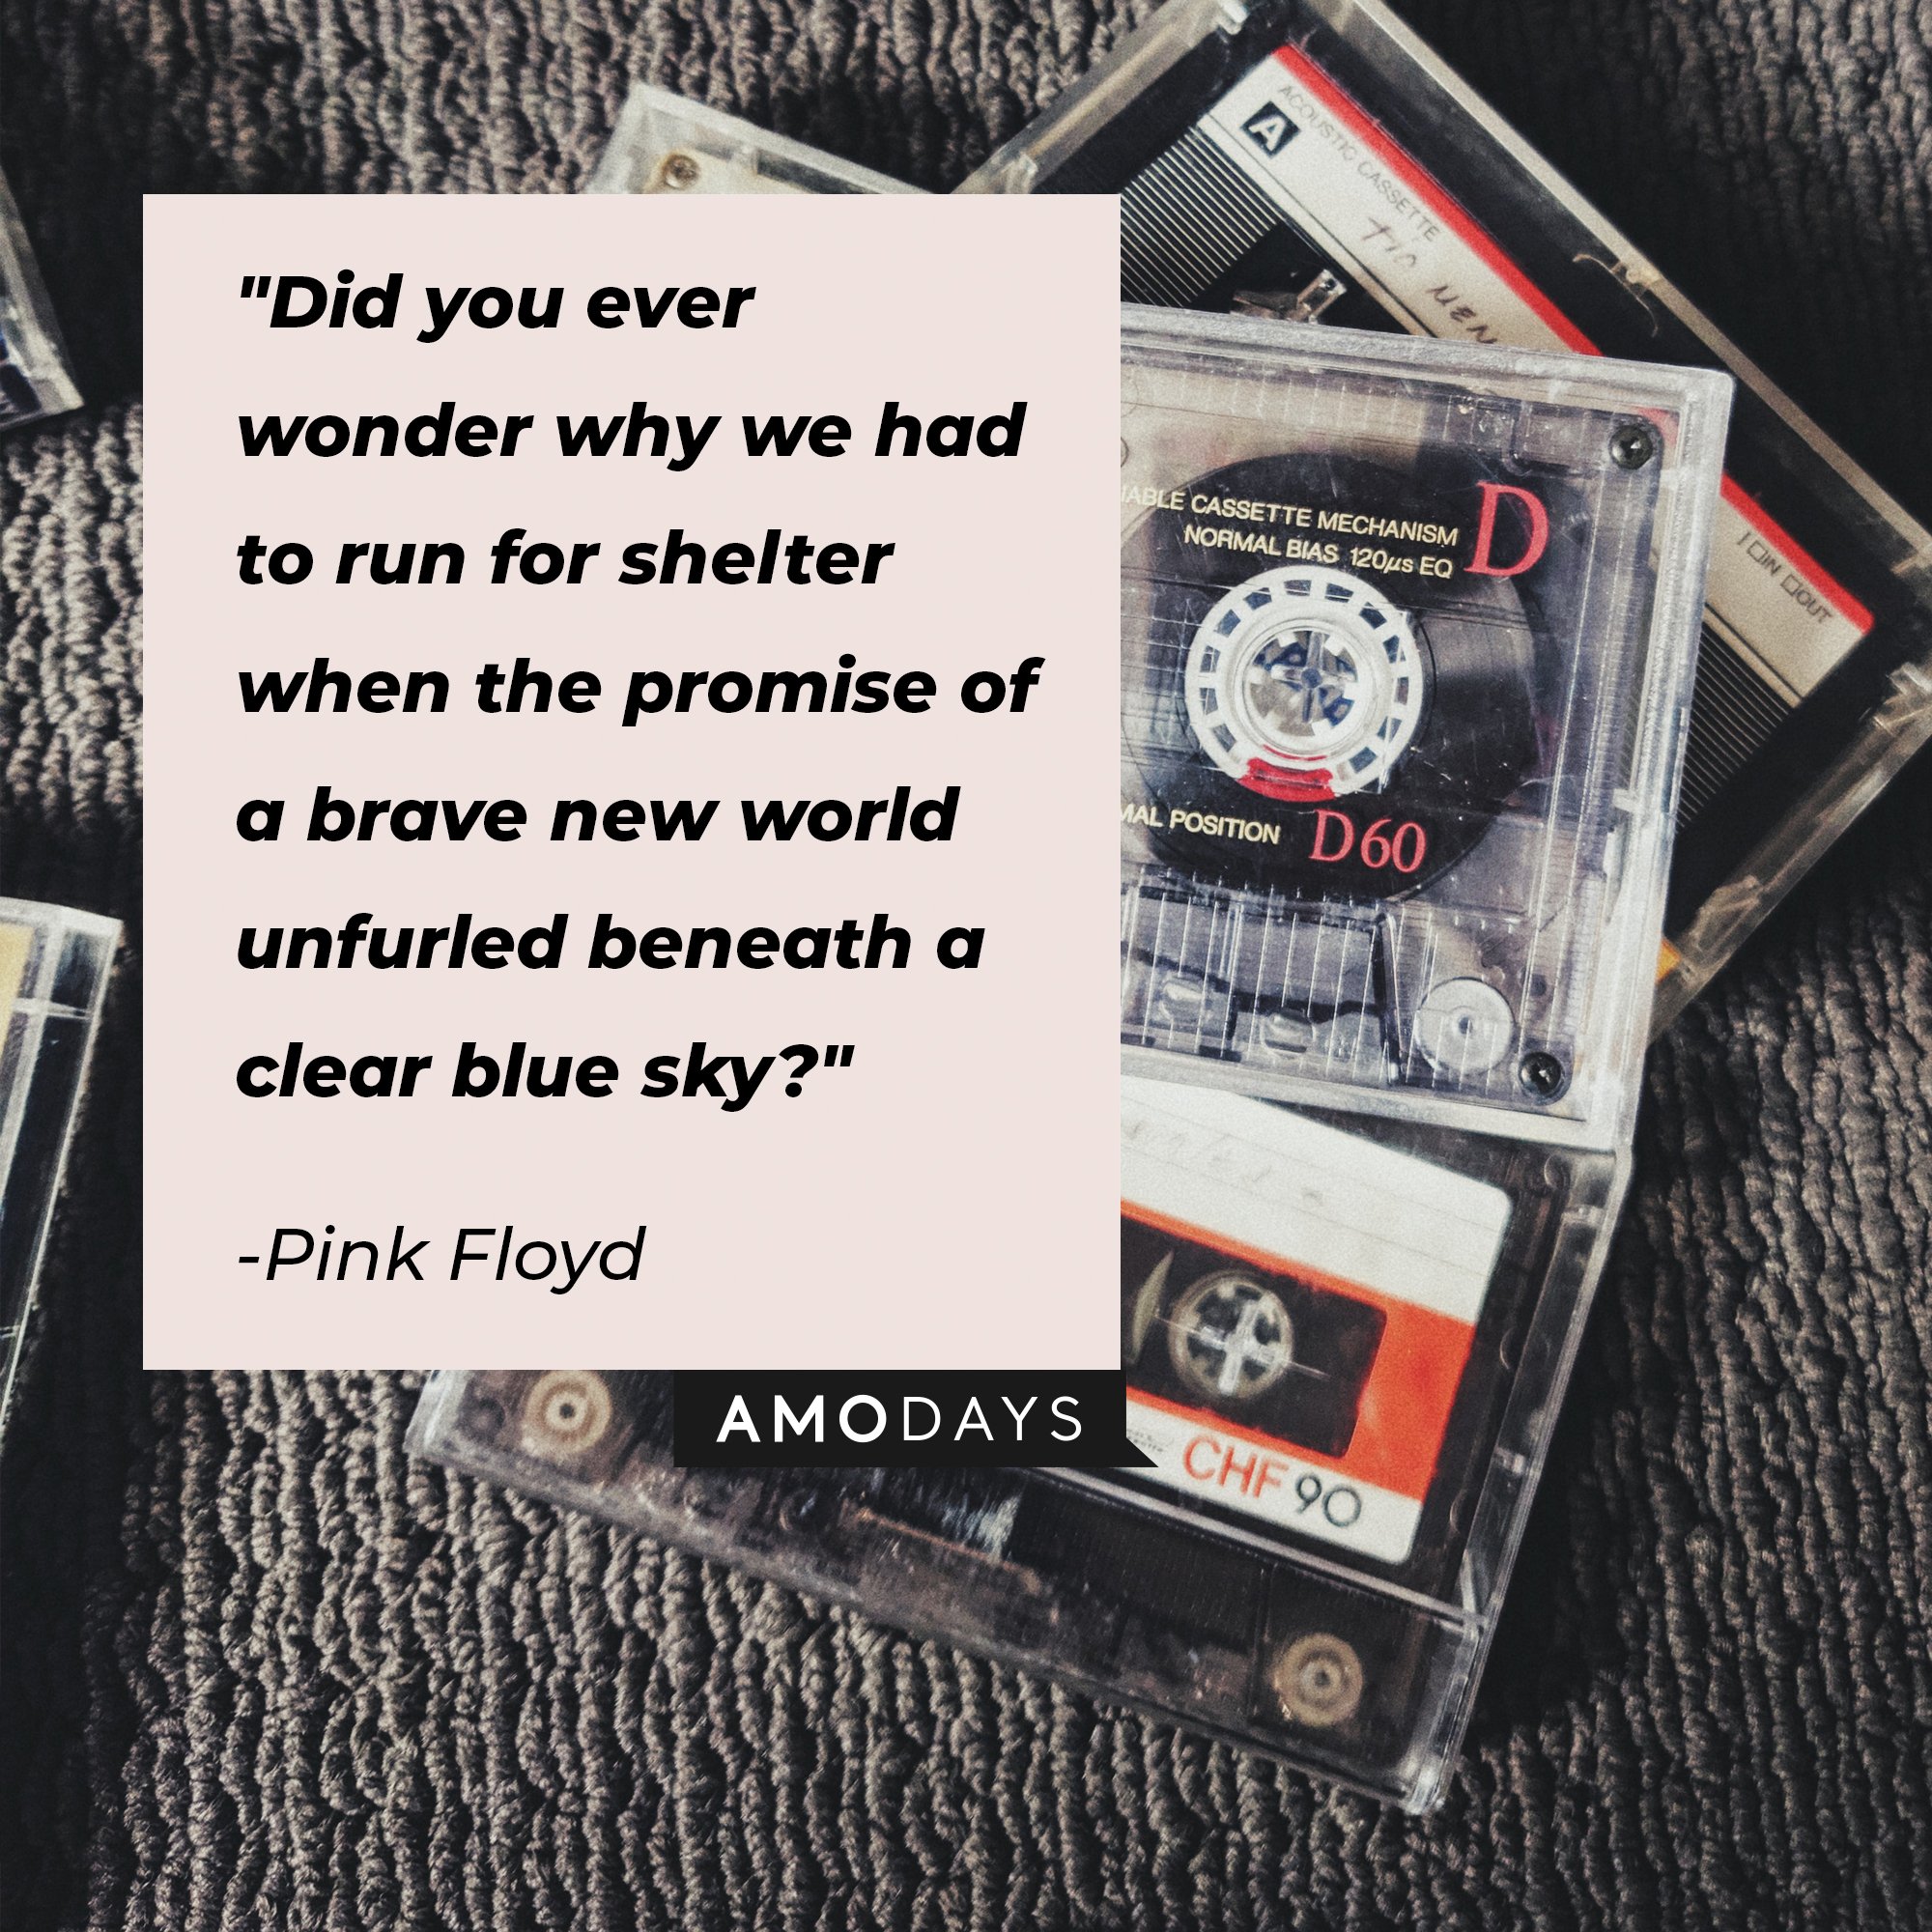 Pink Floyd's quote: "Did you ever wonder why we had to run for shelter when the promise of a brave new world unfurled beneath a clear blue sky?" | Image: AmoDays